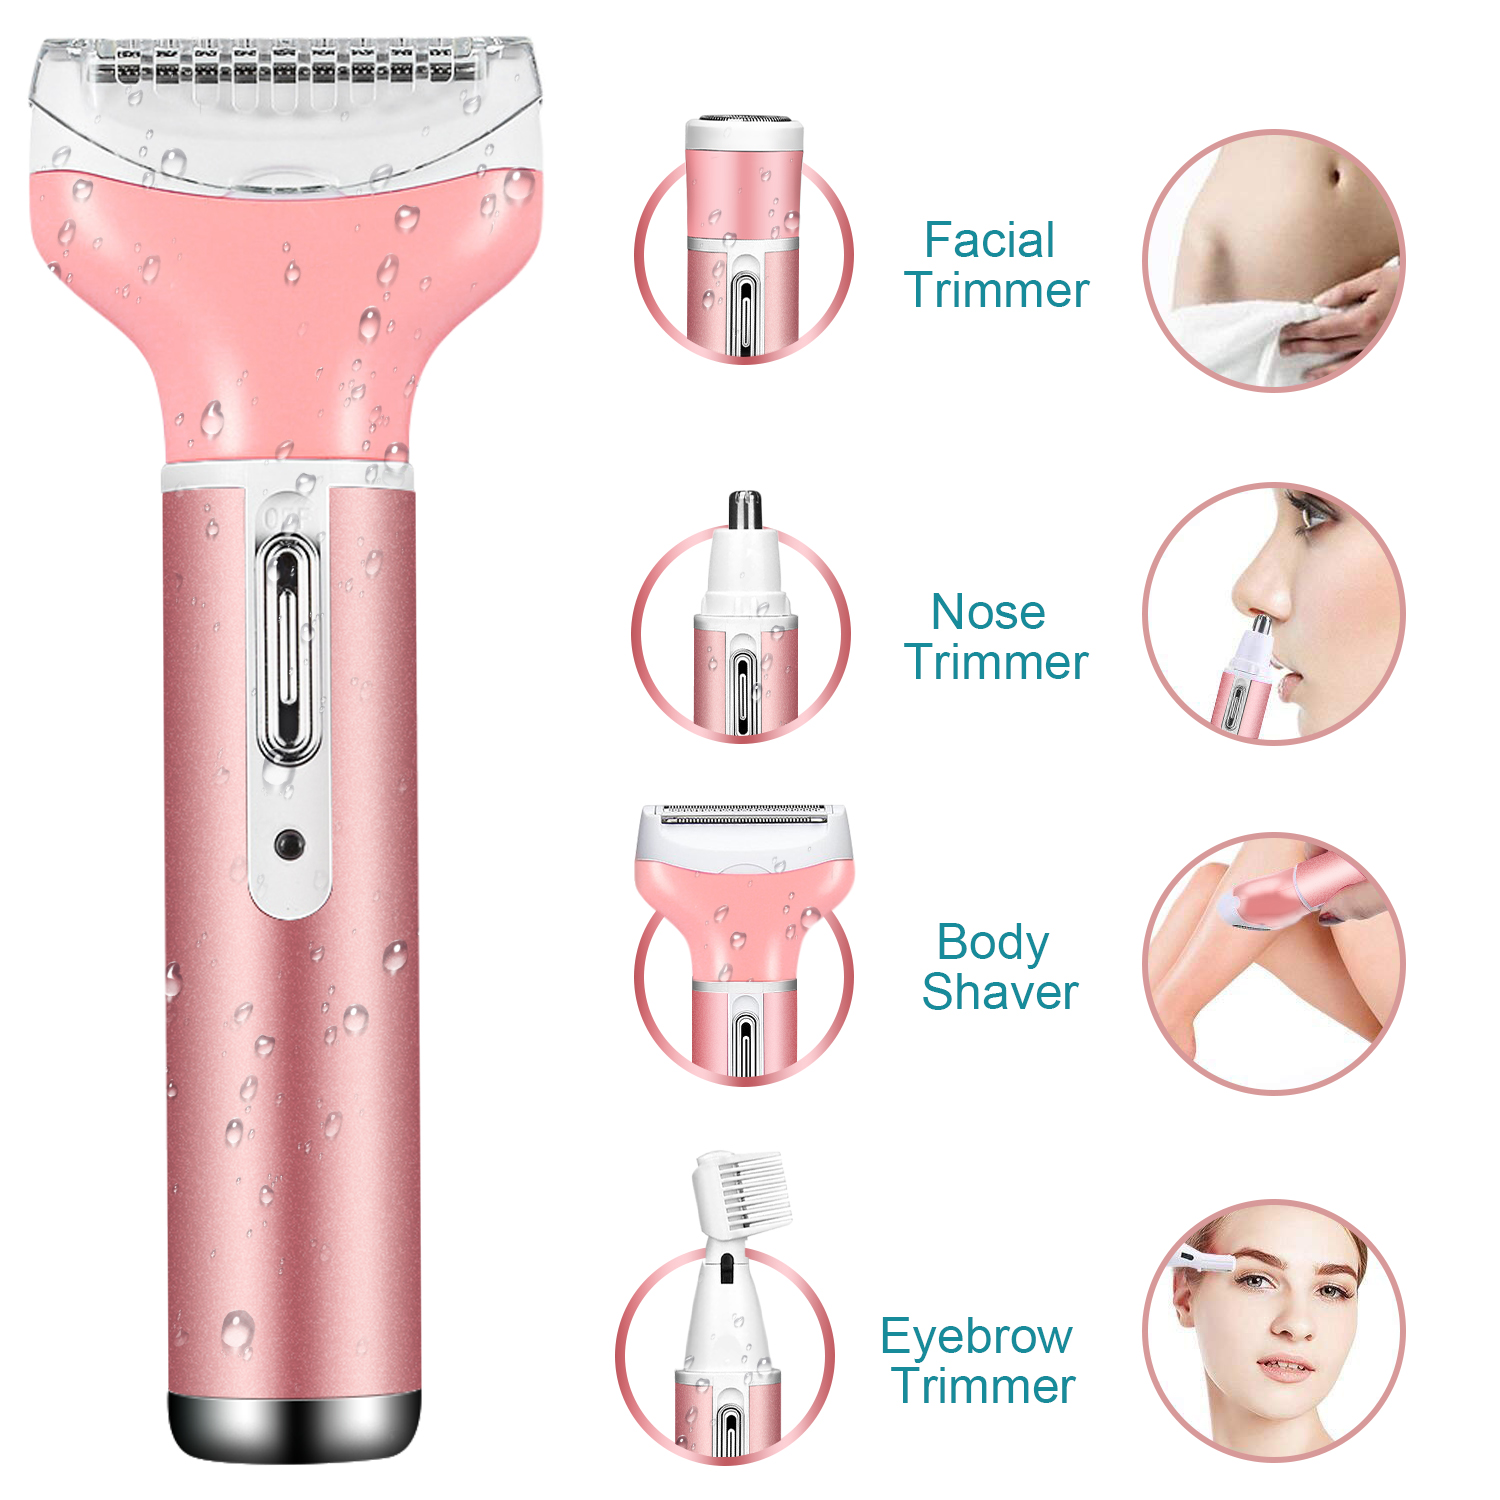 4 in 1 Women Electric Shaver Rechargeable Waterproof Razor Painless Epilator Body Hair Remover Nose Hair Beard Bikini Trimmer Eyebrow Face Facial Armpit Legs Removal Clipper Lady Grooming Groomer Kit - image 3 of 10